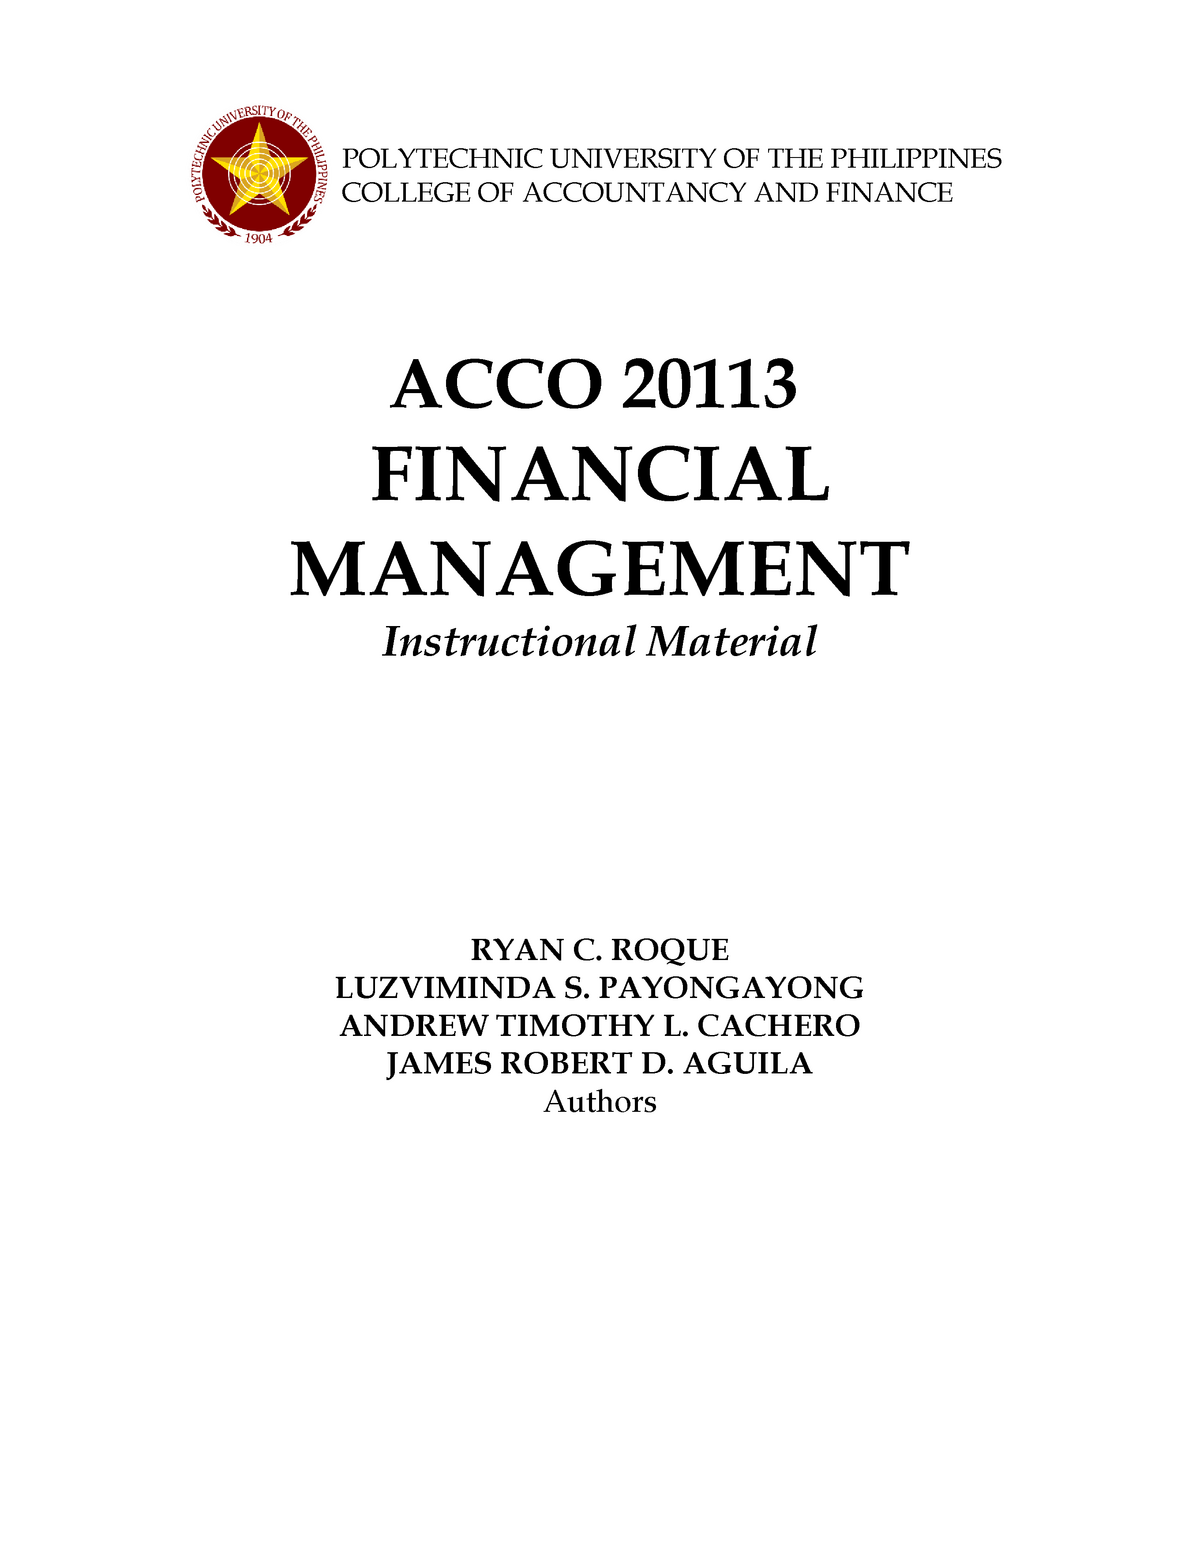 thesis title financial management